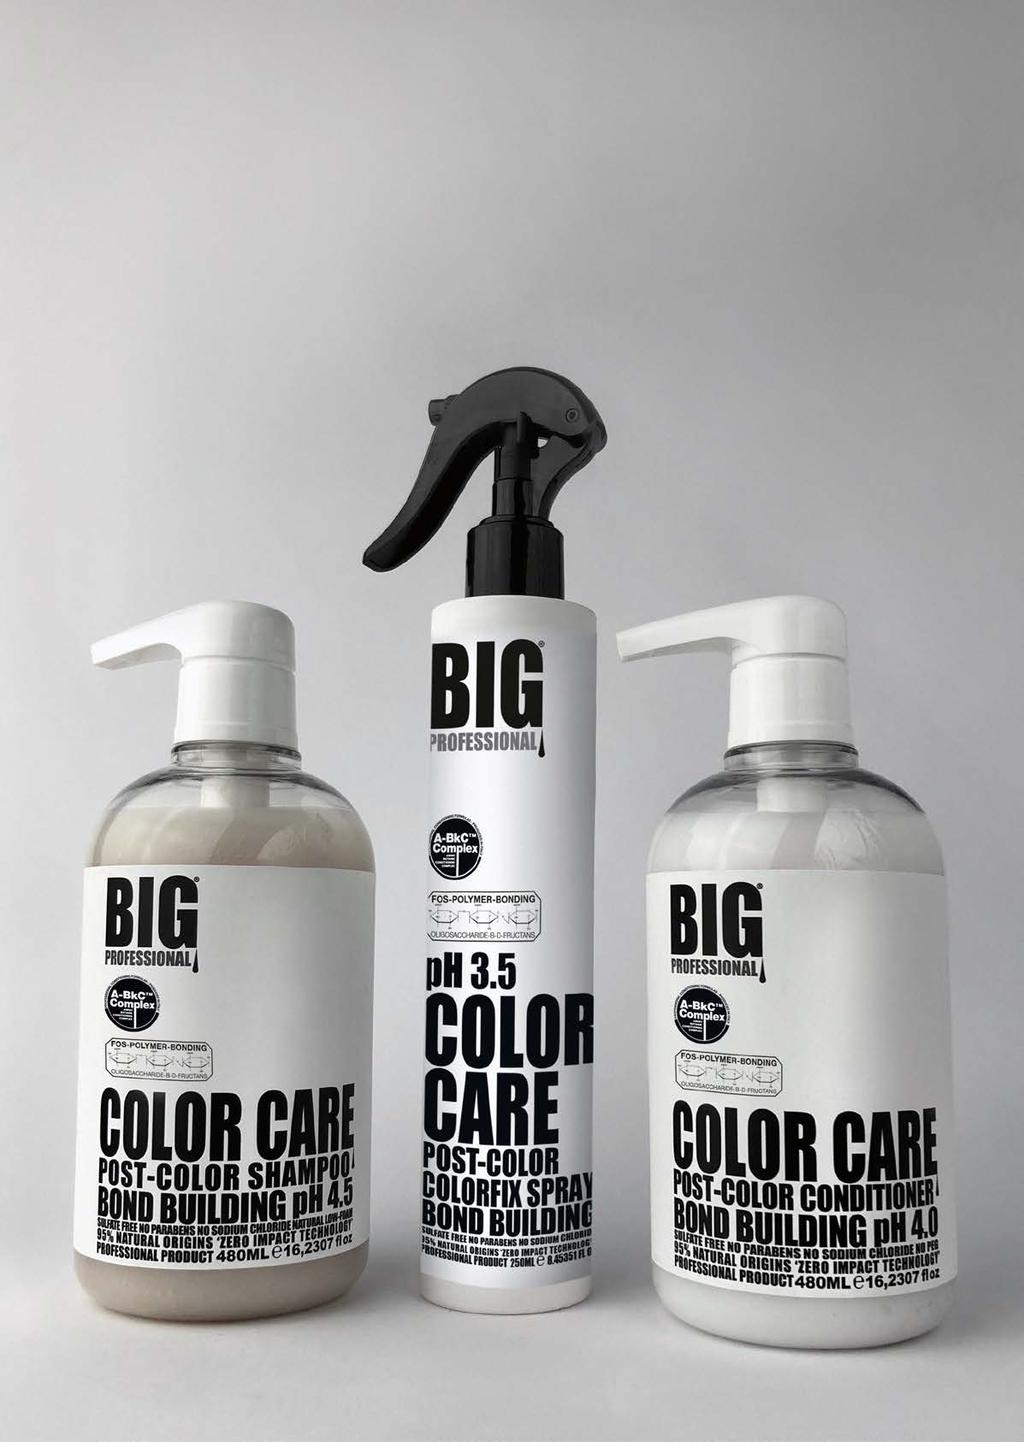 ph BALANCING COLOR CARE HOME TREATMENTS Rebuilds, Strengthens & Fortifies Damaged Hair From The Inside Out Detangles, Anti-Static Corrects Previous Color/Chemical Damage Maintains Luxurious, Soft &